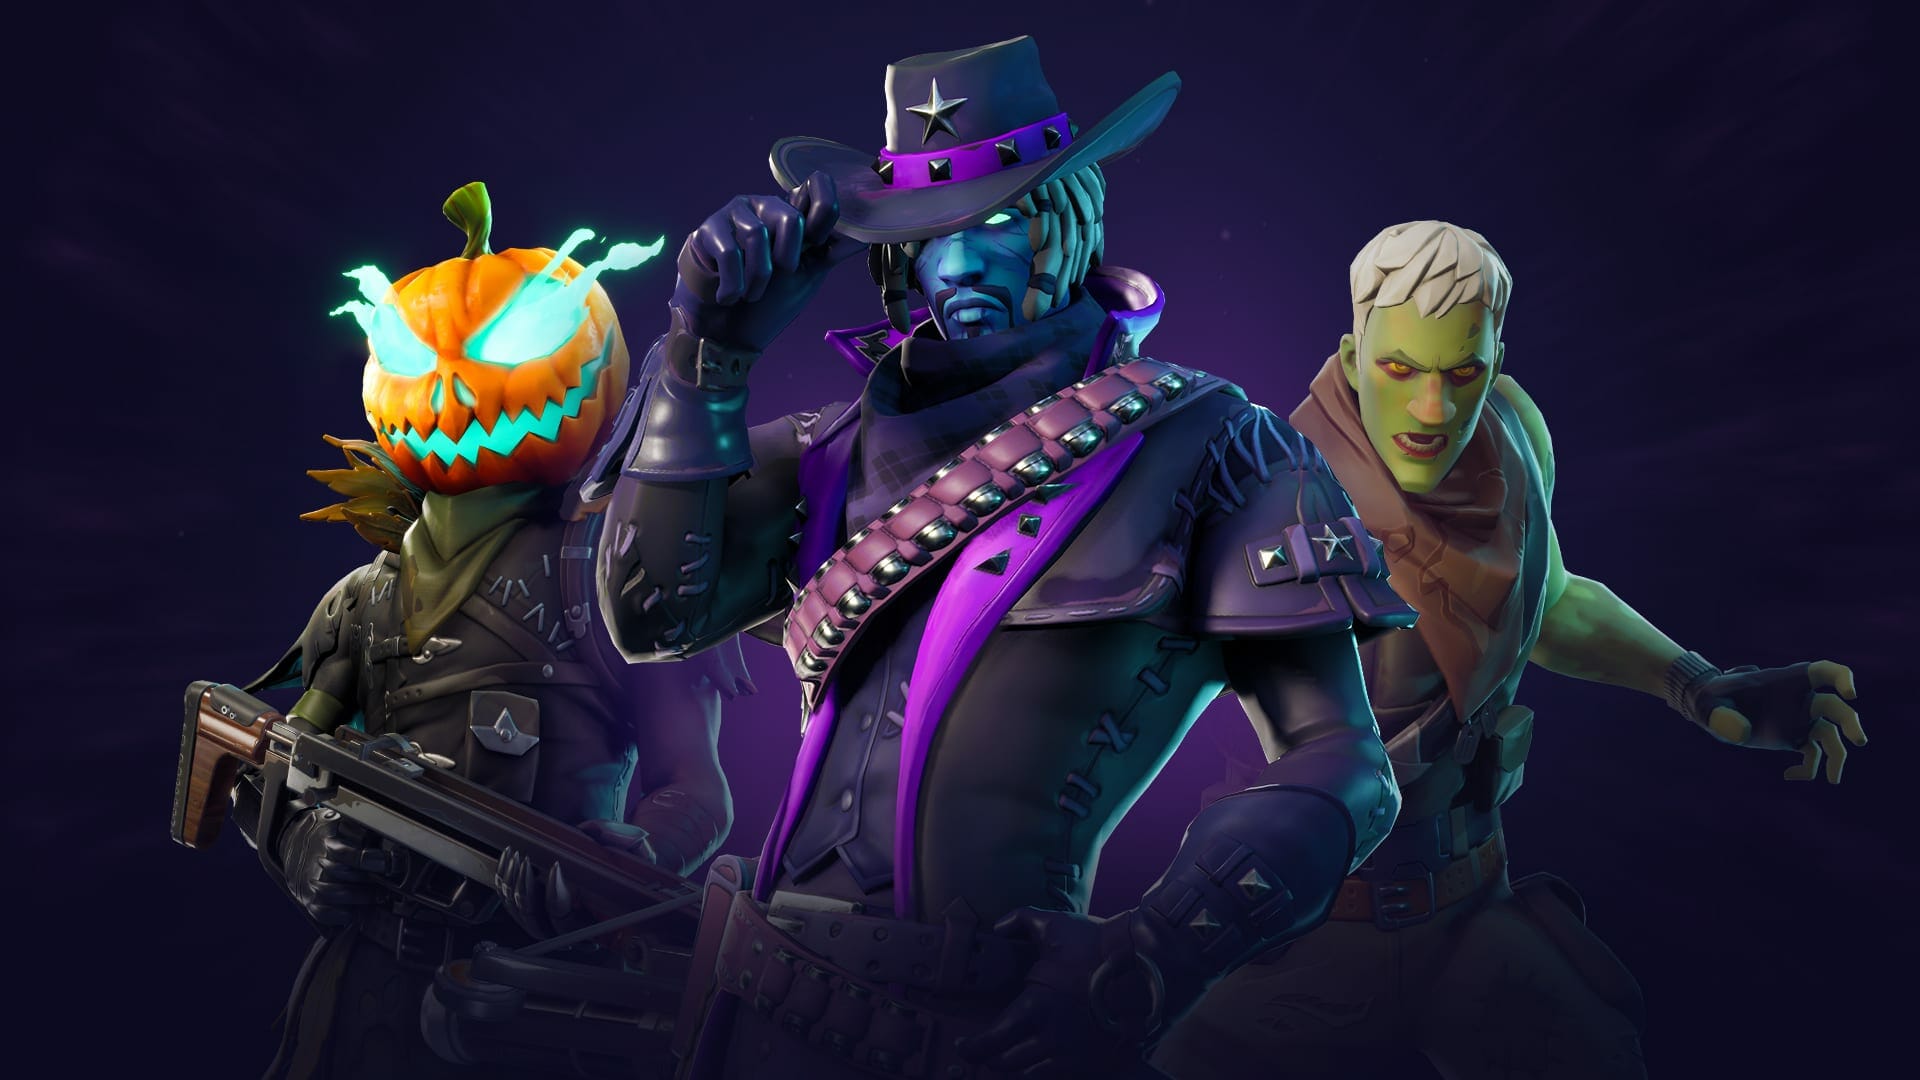 fortnite 6 20 patch leaked items and events halloween lobby cosmetics and emotes - fortnite purple emotes